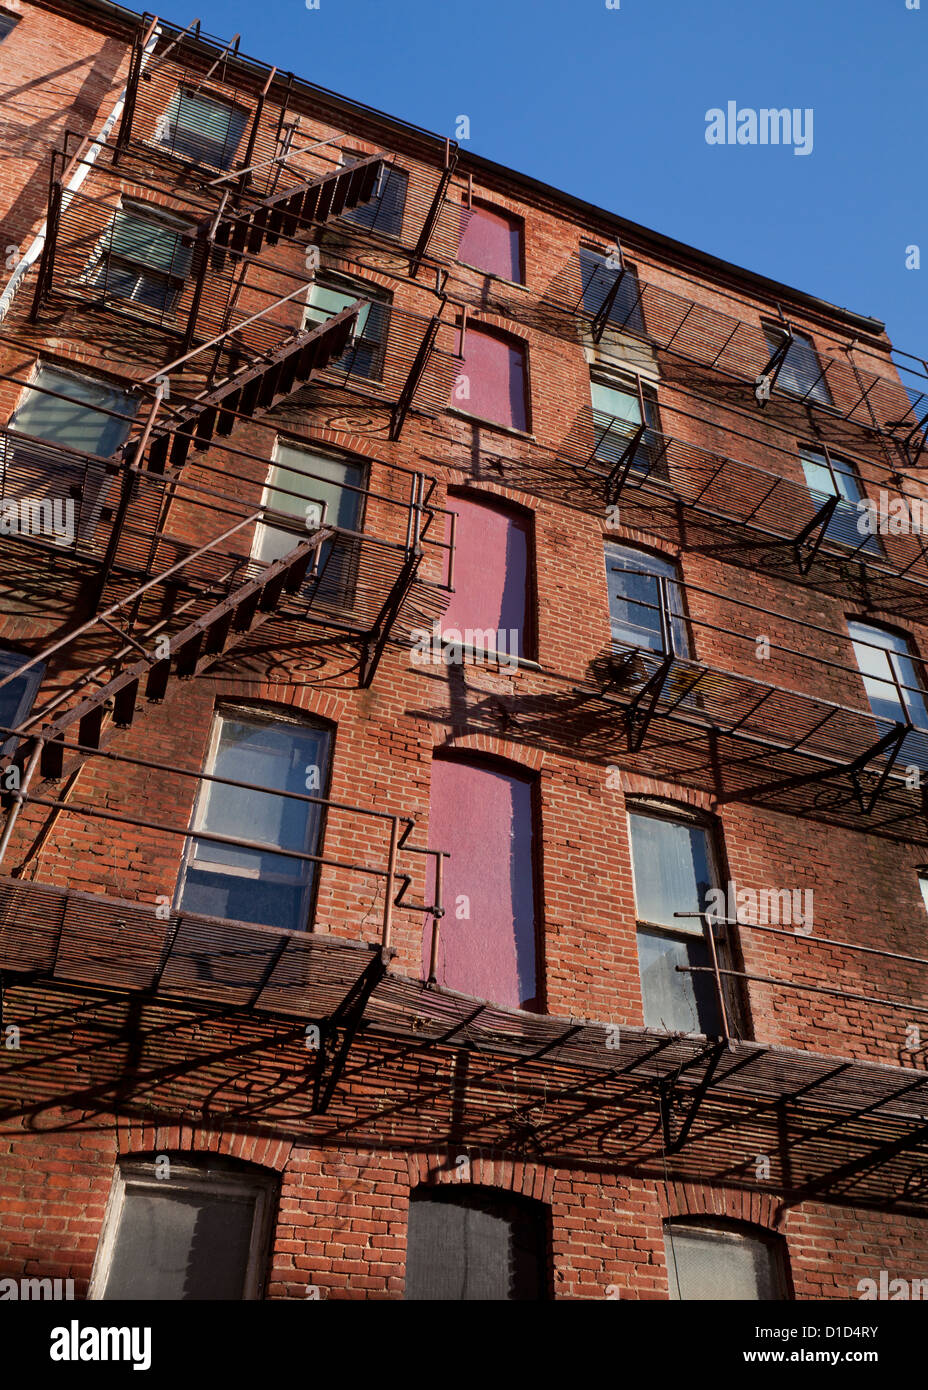 Fire escape stairs on an old brick apartment building Stock Photo